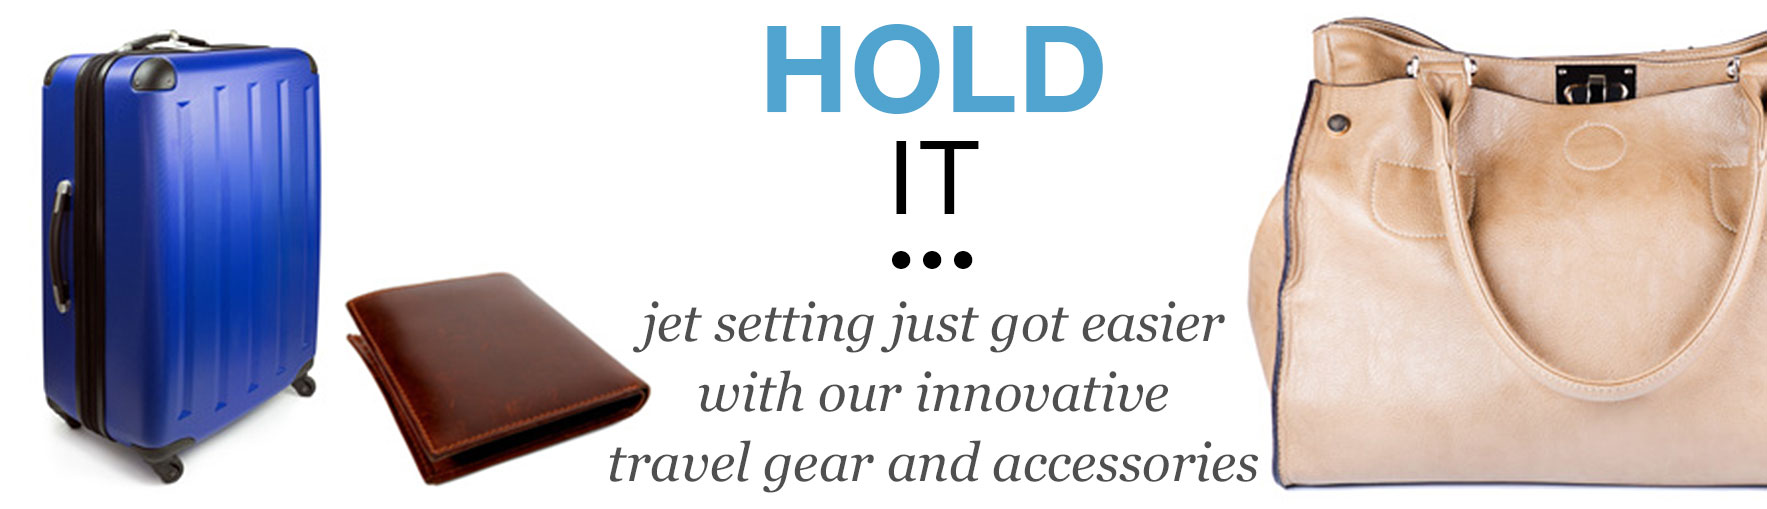 Hold It - Jet setting just got easier with our innovative travel gear and accessories